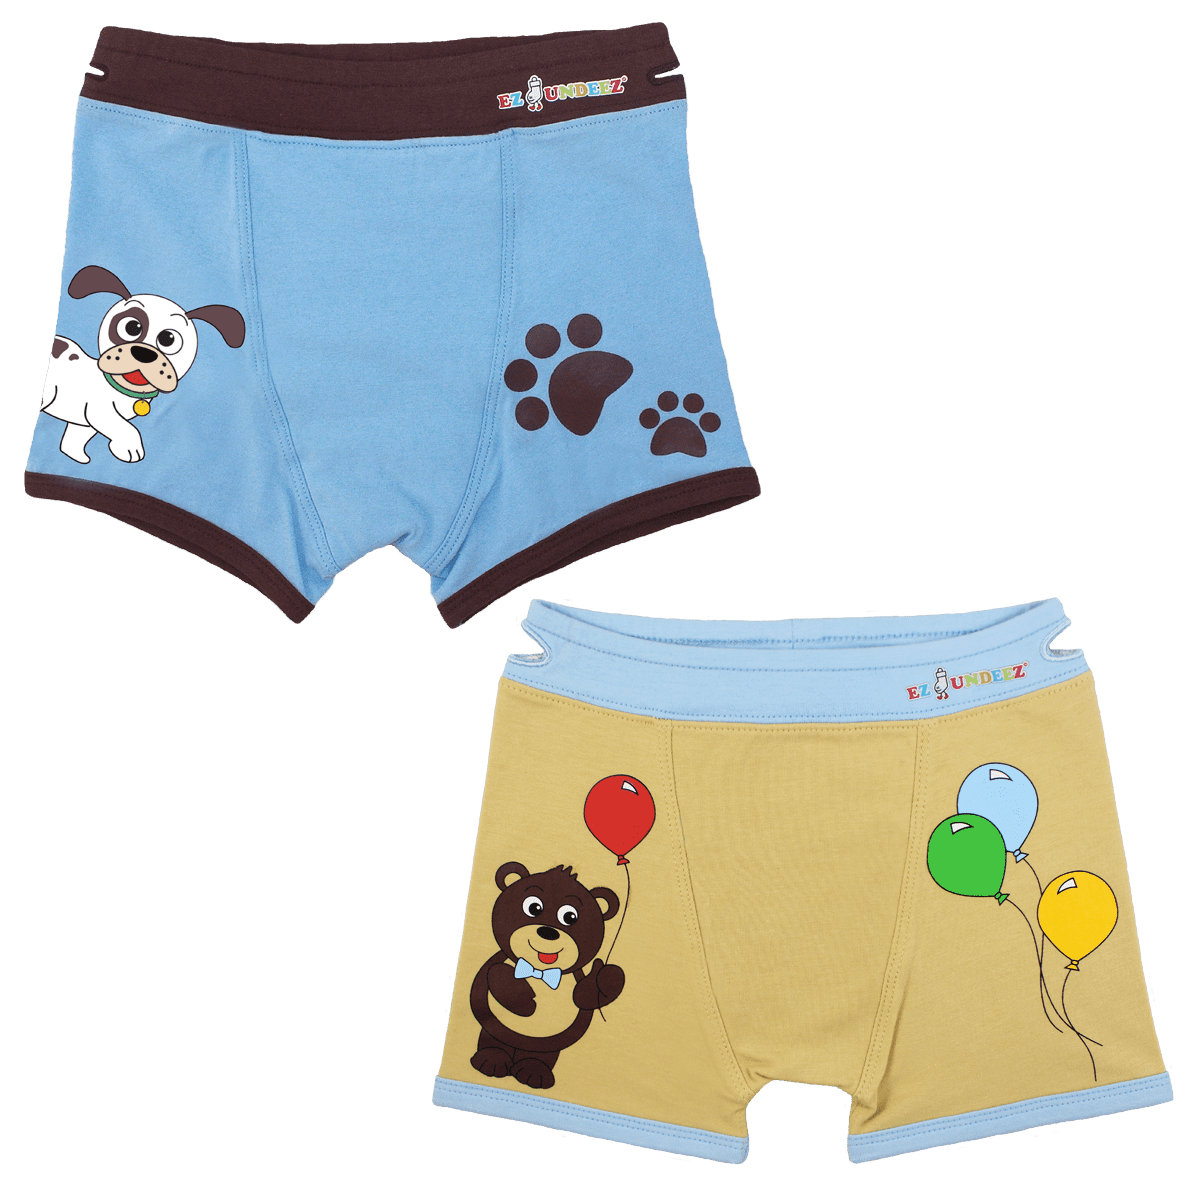 Ez Undeez Toddler Potty Training Pants with Padded Layer 